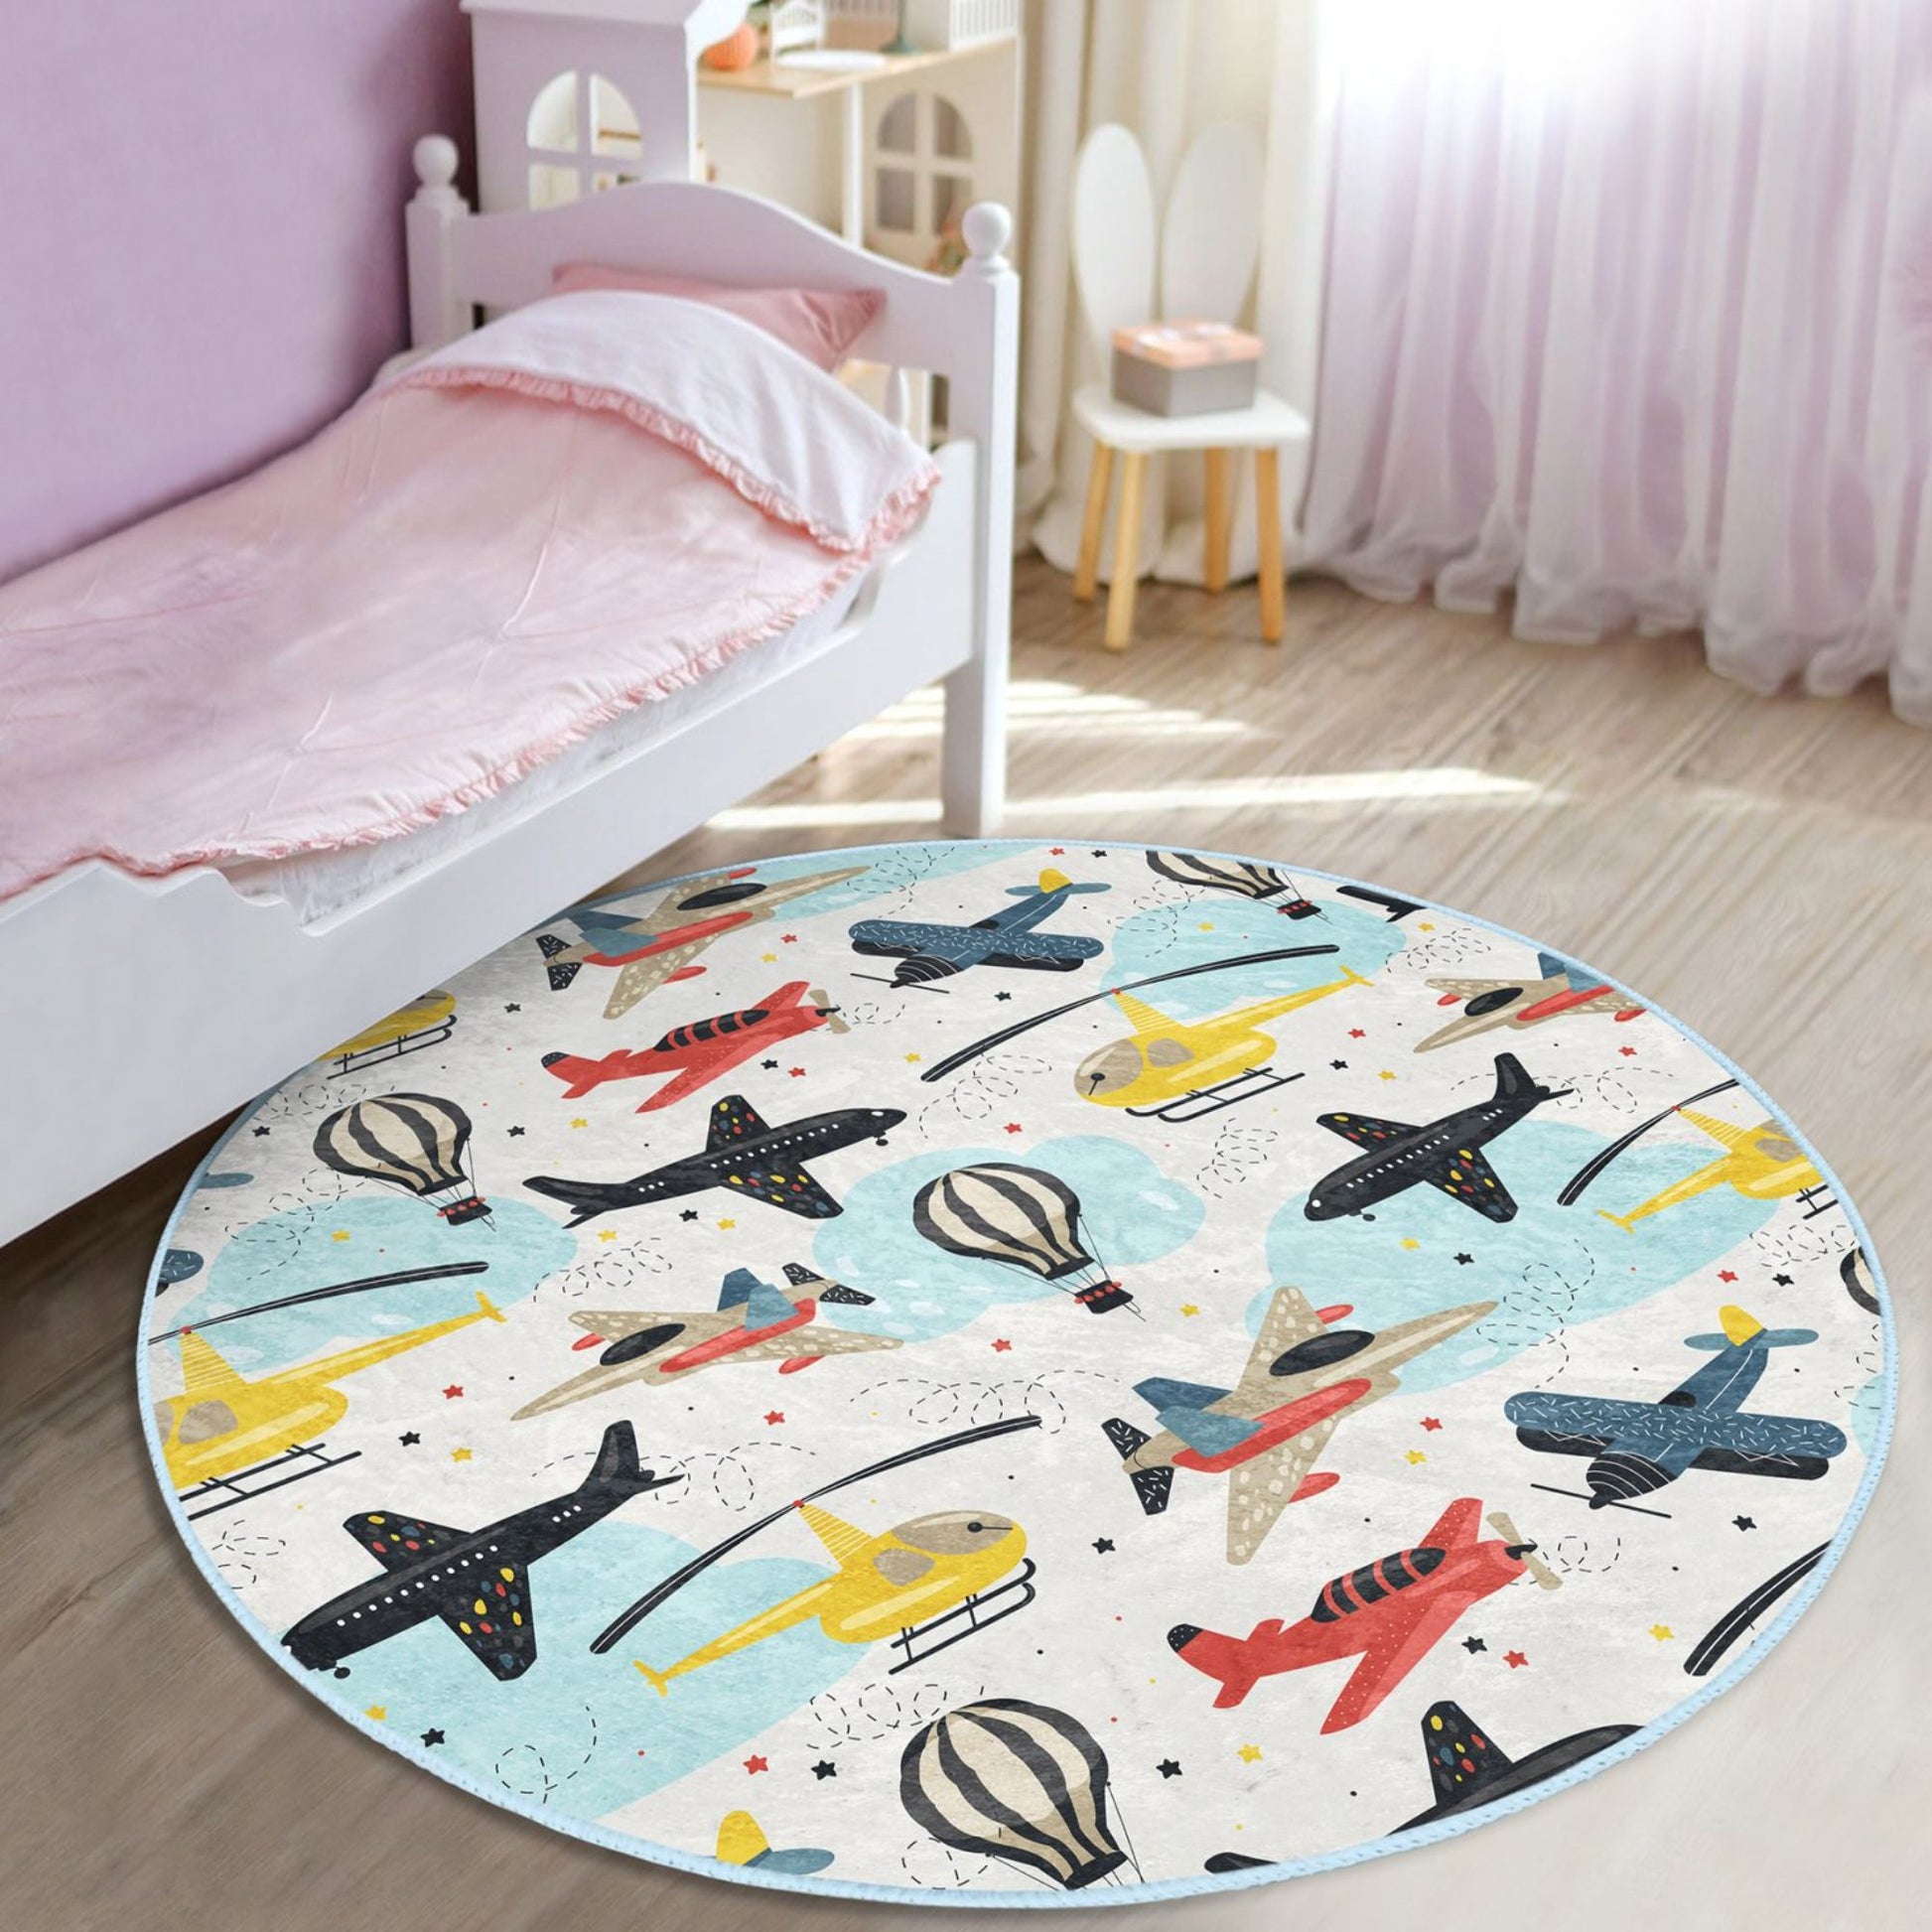 Homeezone's Planes Helicopters Patterned Kids' Room Washable Rug